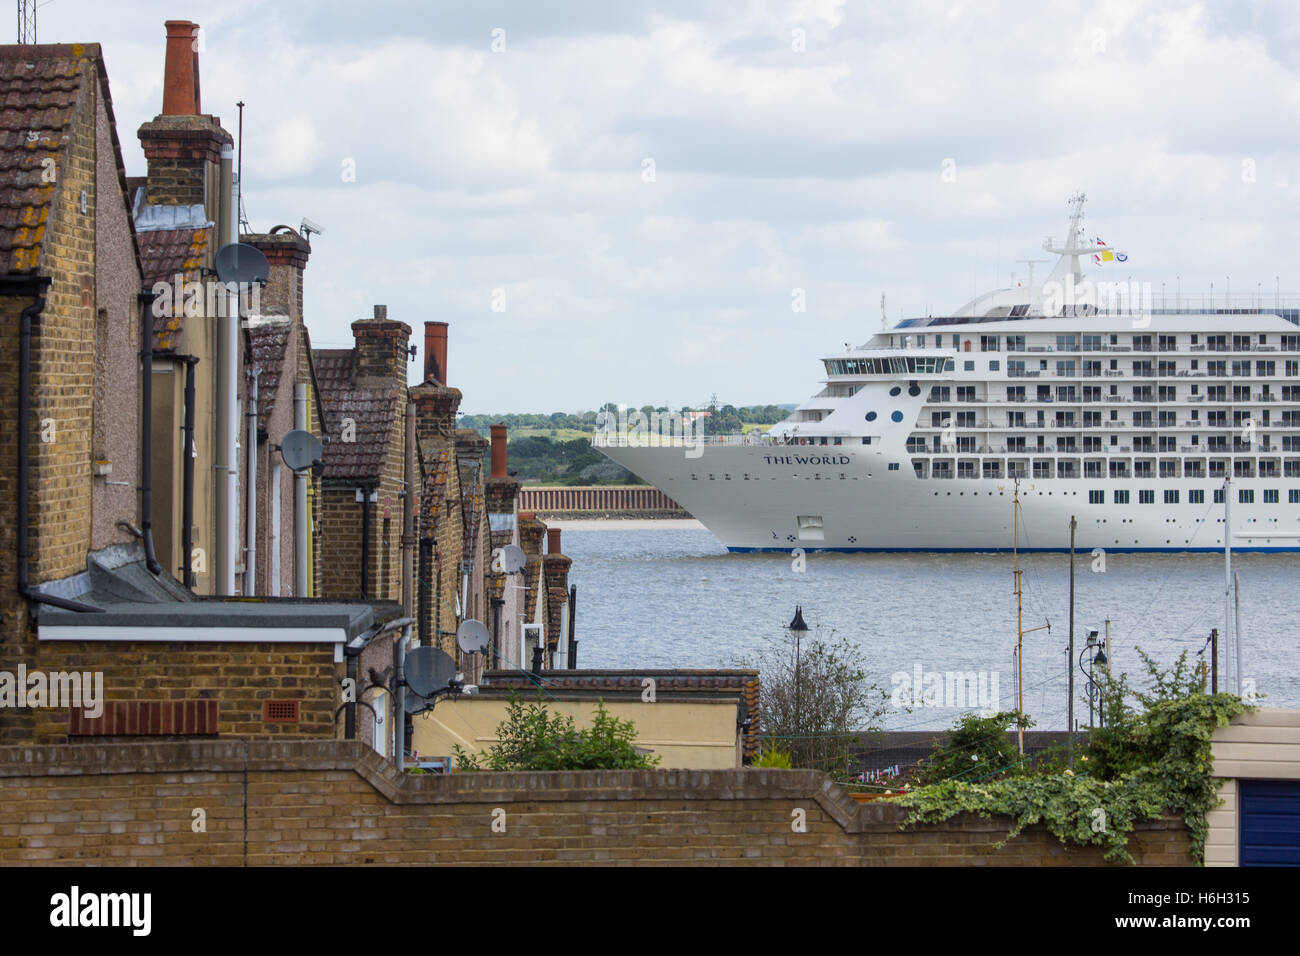 The World residential cruise ship pictured on the Thames in 2016 Stock Photo